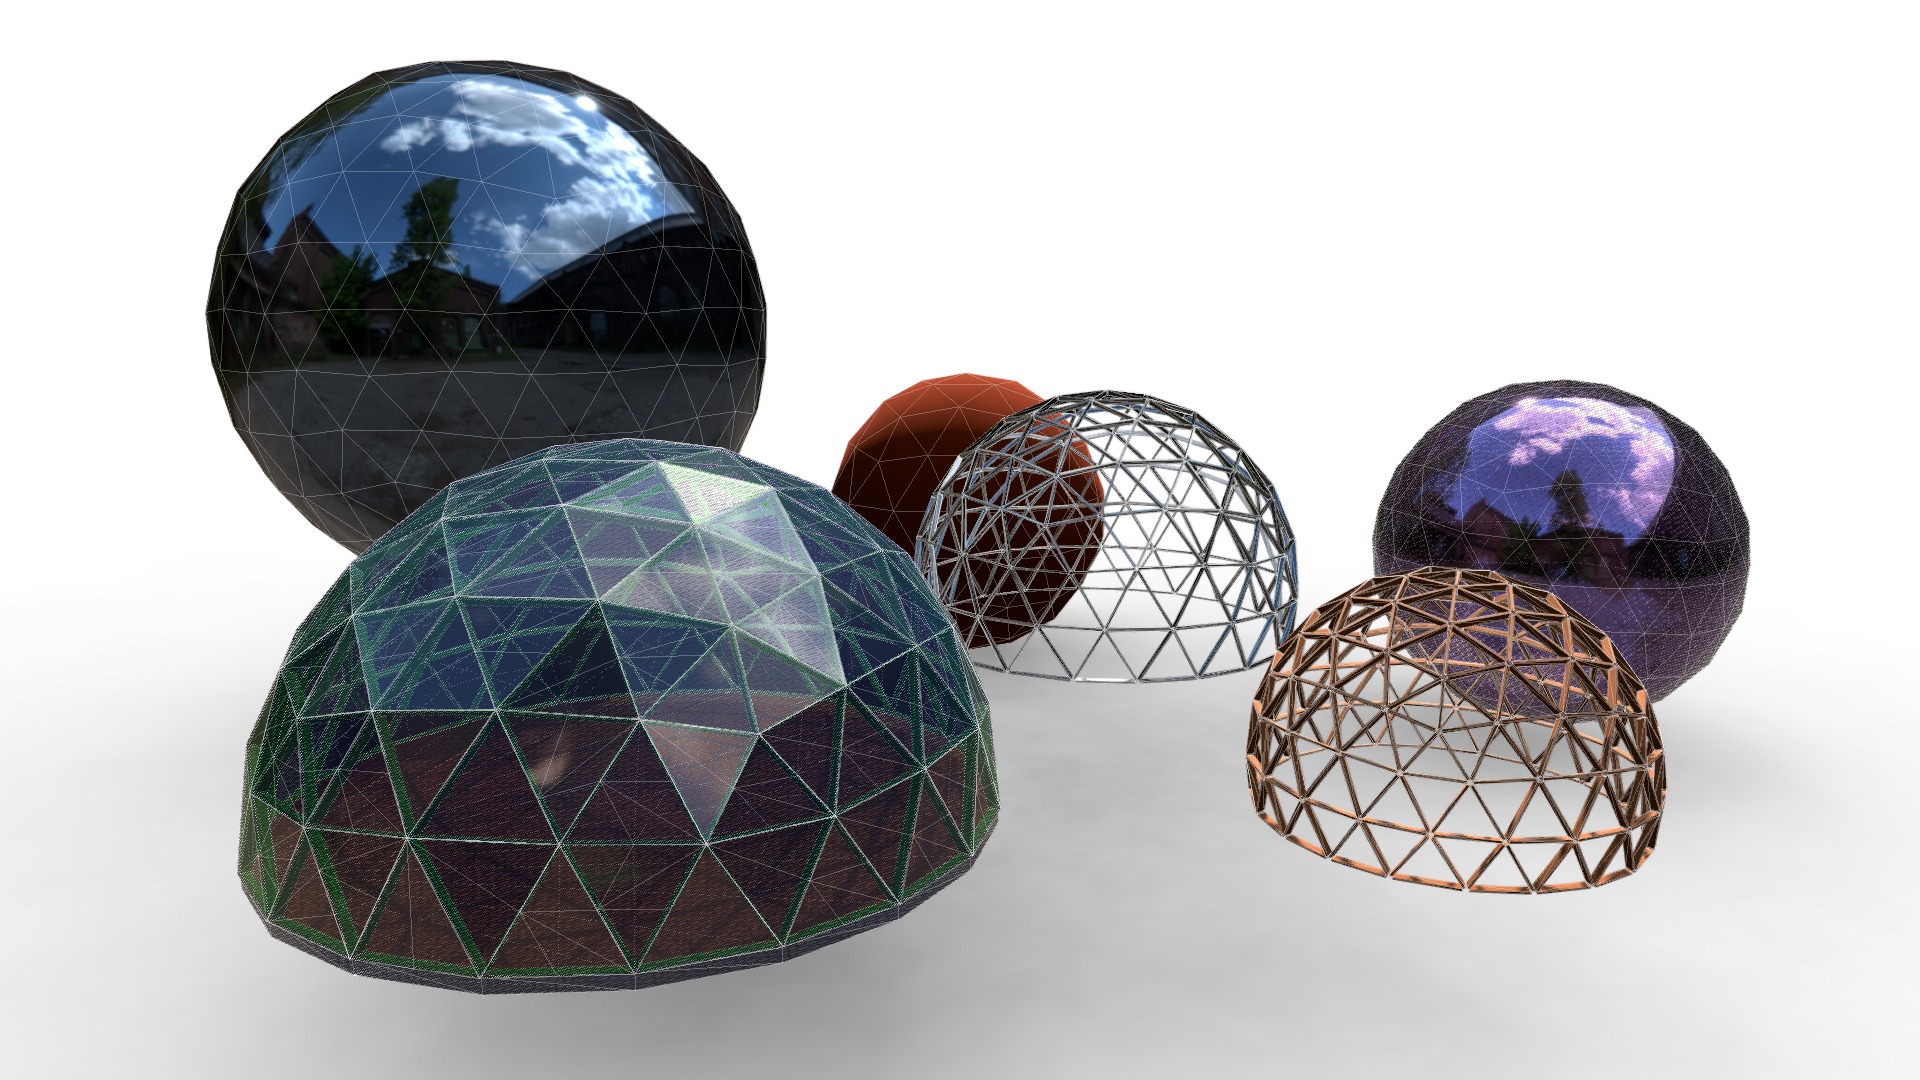 3D model Geodesic dome / sphere - This is a 3D model of the Geodesic dome / sphere. The 3D model is about a group of different colored planets.